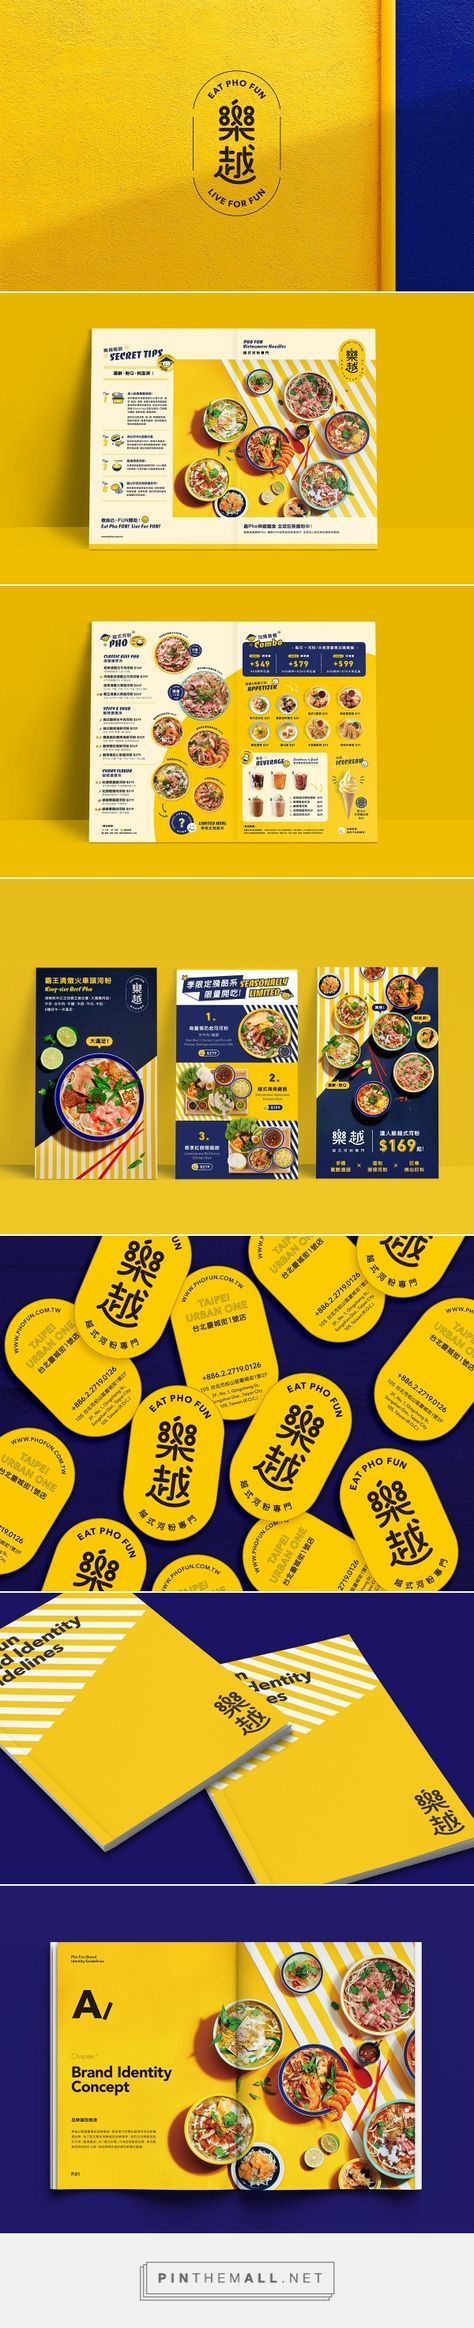 vector, ramen, modern, design, menu, asian, illustration, japanese, graphic, template, chinese, japan, meal, logo, food, traditional, restaurant, background, noodle, icon, symbol, cafe, sign, business, bowl, delicious, isolated, creative, simple, cuisine, cooking, spaghetti, pasta, concept, lunch, kitchen, oriental, dish, noodles, asia, branding, dinner, gradient, chopsticks, web, red, banner, brochure, promotion, poster Brand Identity, Branding Design, Brand Identity Design, Layout Design, Web Design, Design, Packaging Design, Branding Design Logo, Graphic Design Branding